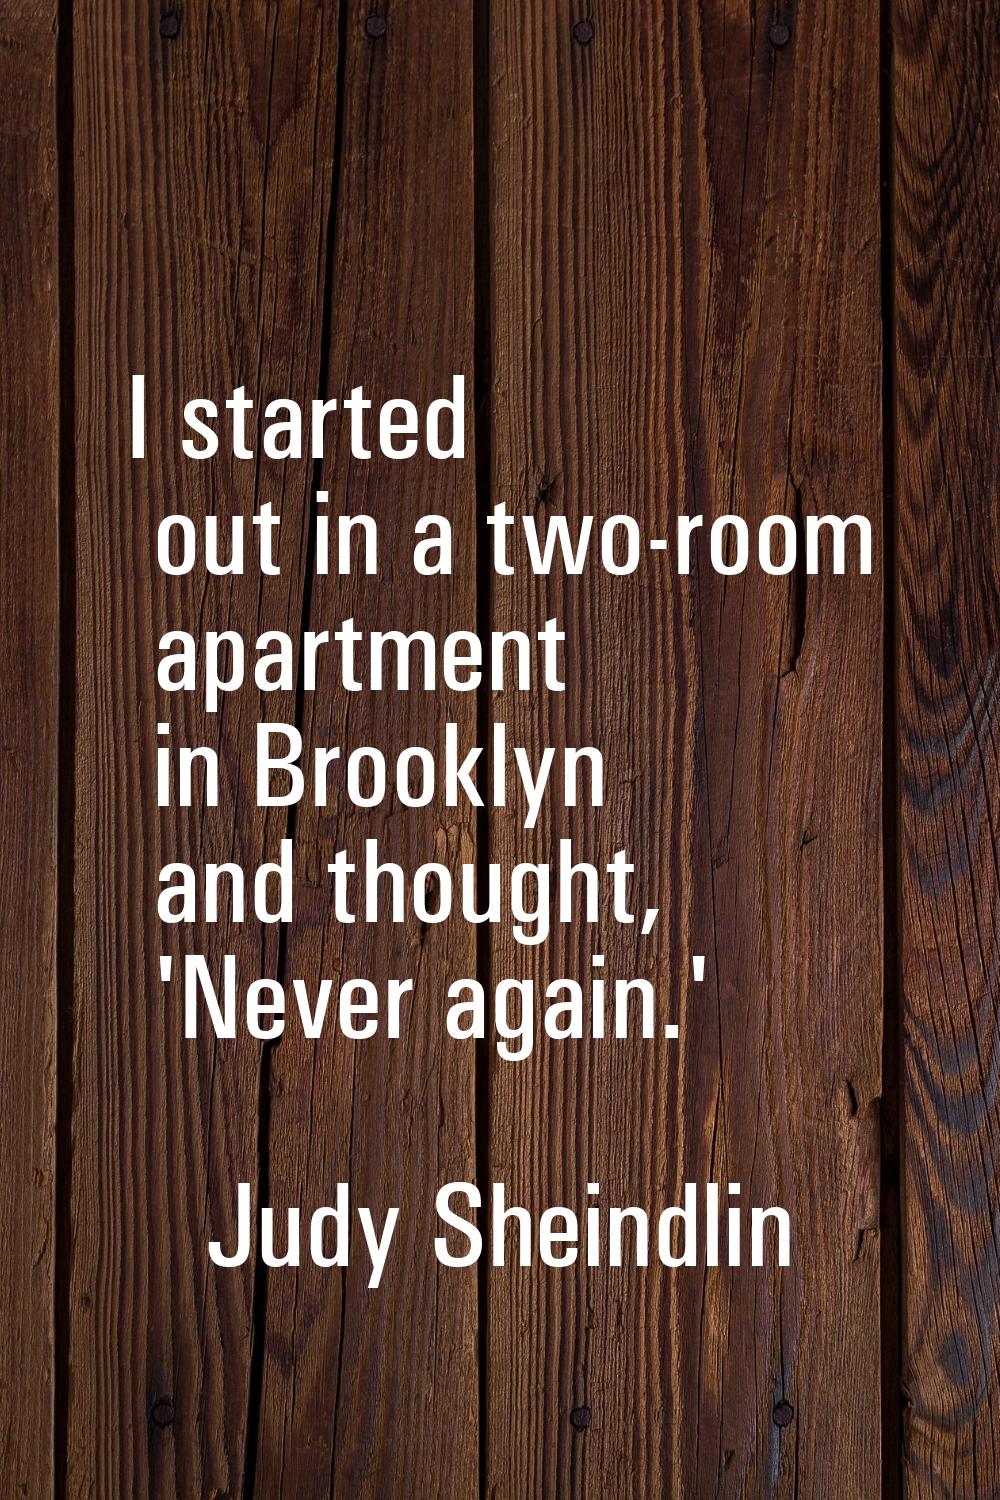 I started out in a two-room apartment in Brooklyn and thought, 'Never again.'